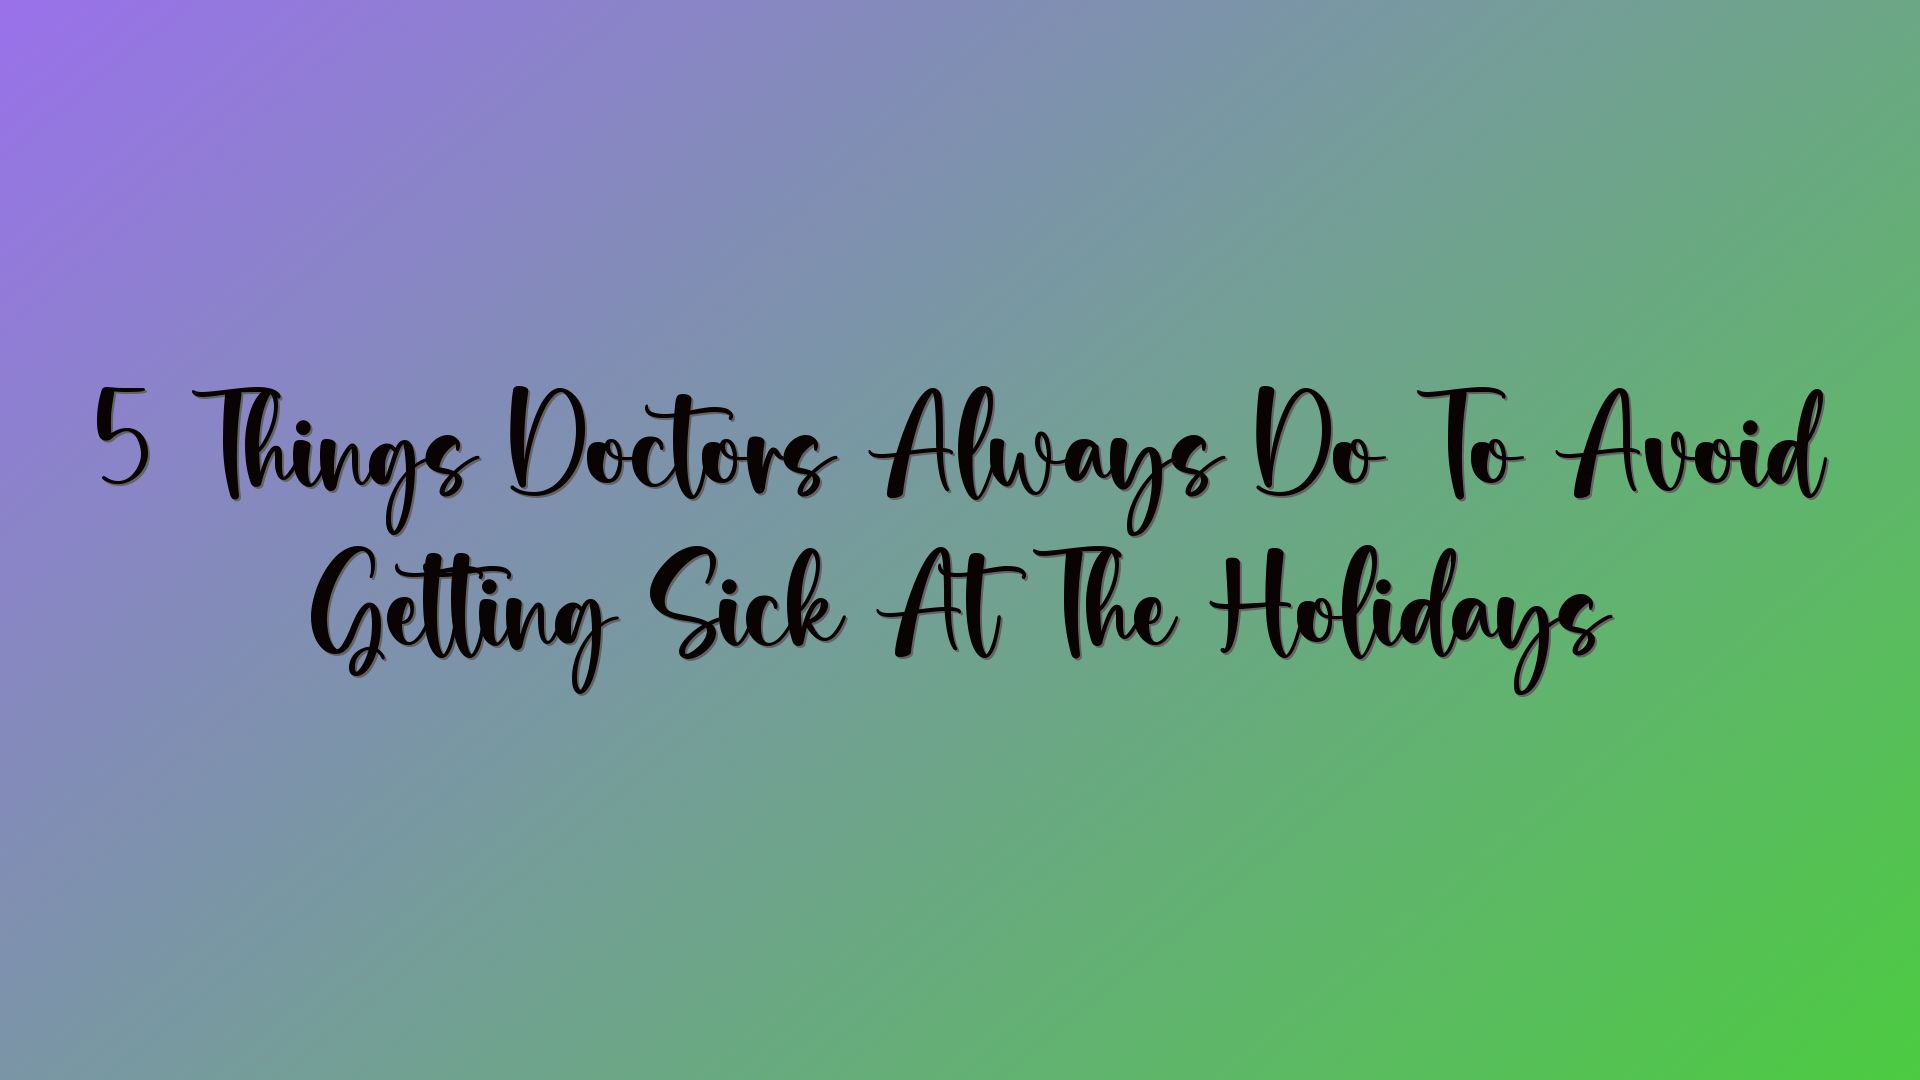 5 Things Doctors Always Do To Avoid Getting Sick At The Holidays